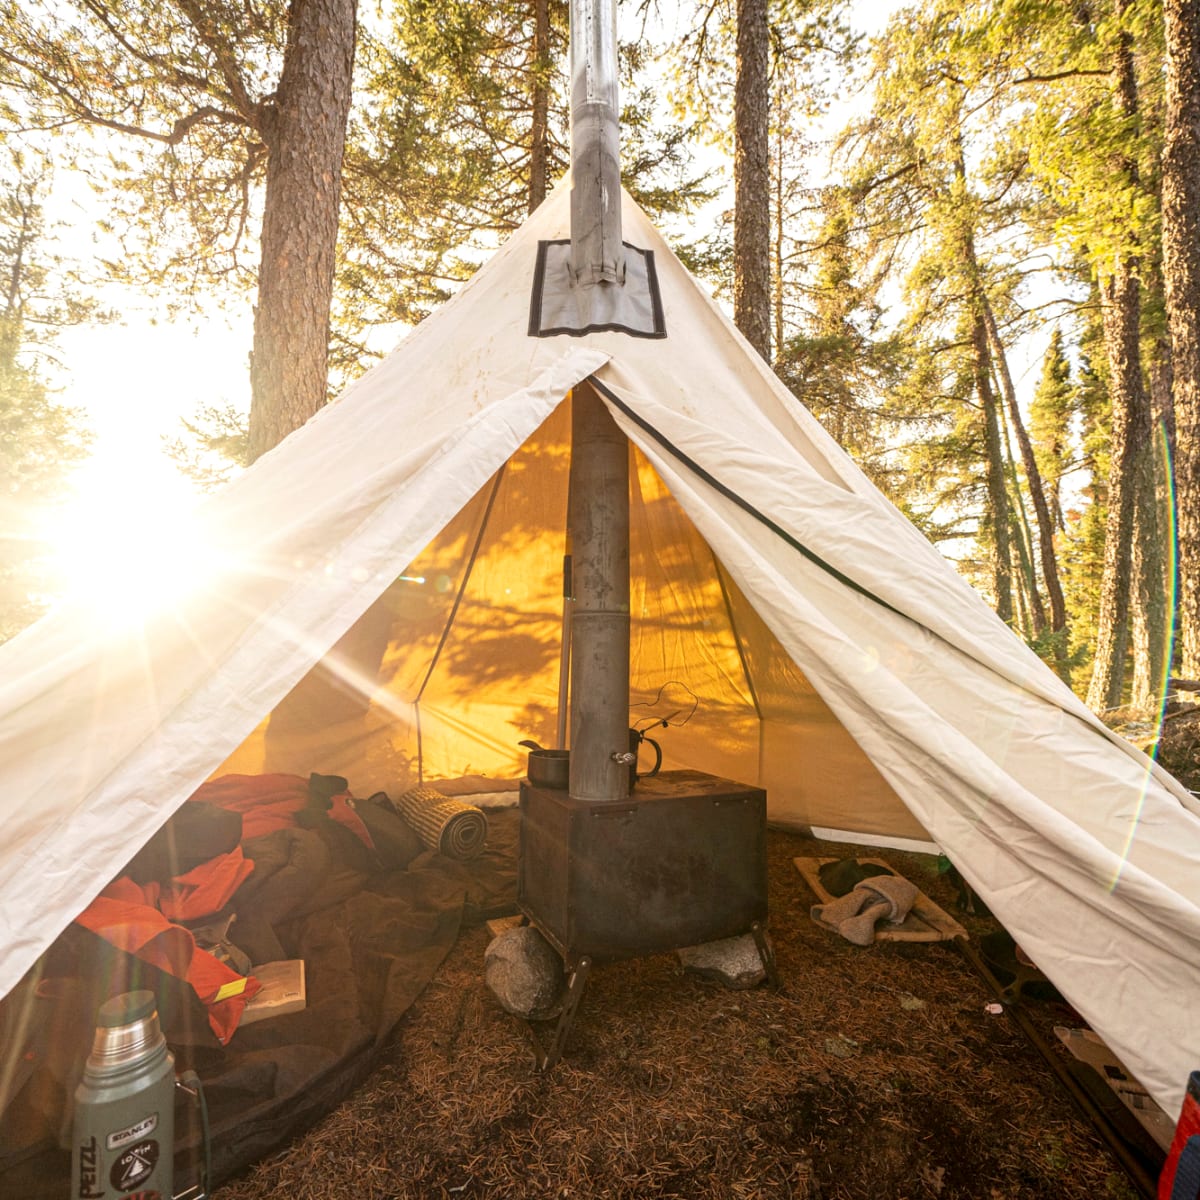 Tent Stoves for Cold Weather Camping, Snowtrekker Canvas Tents